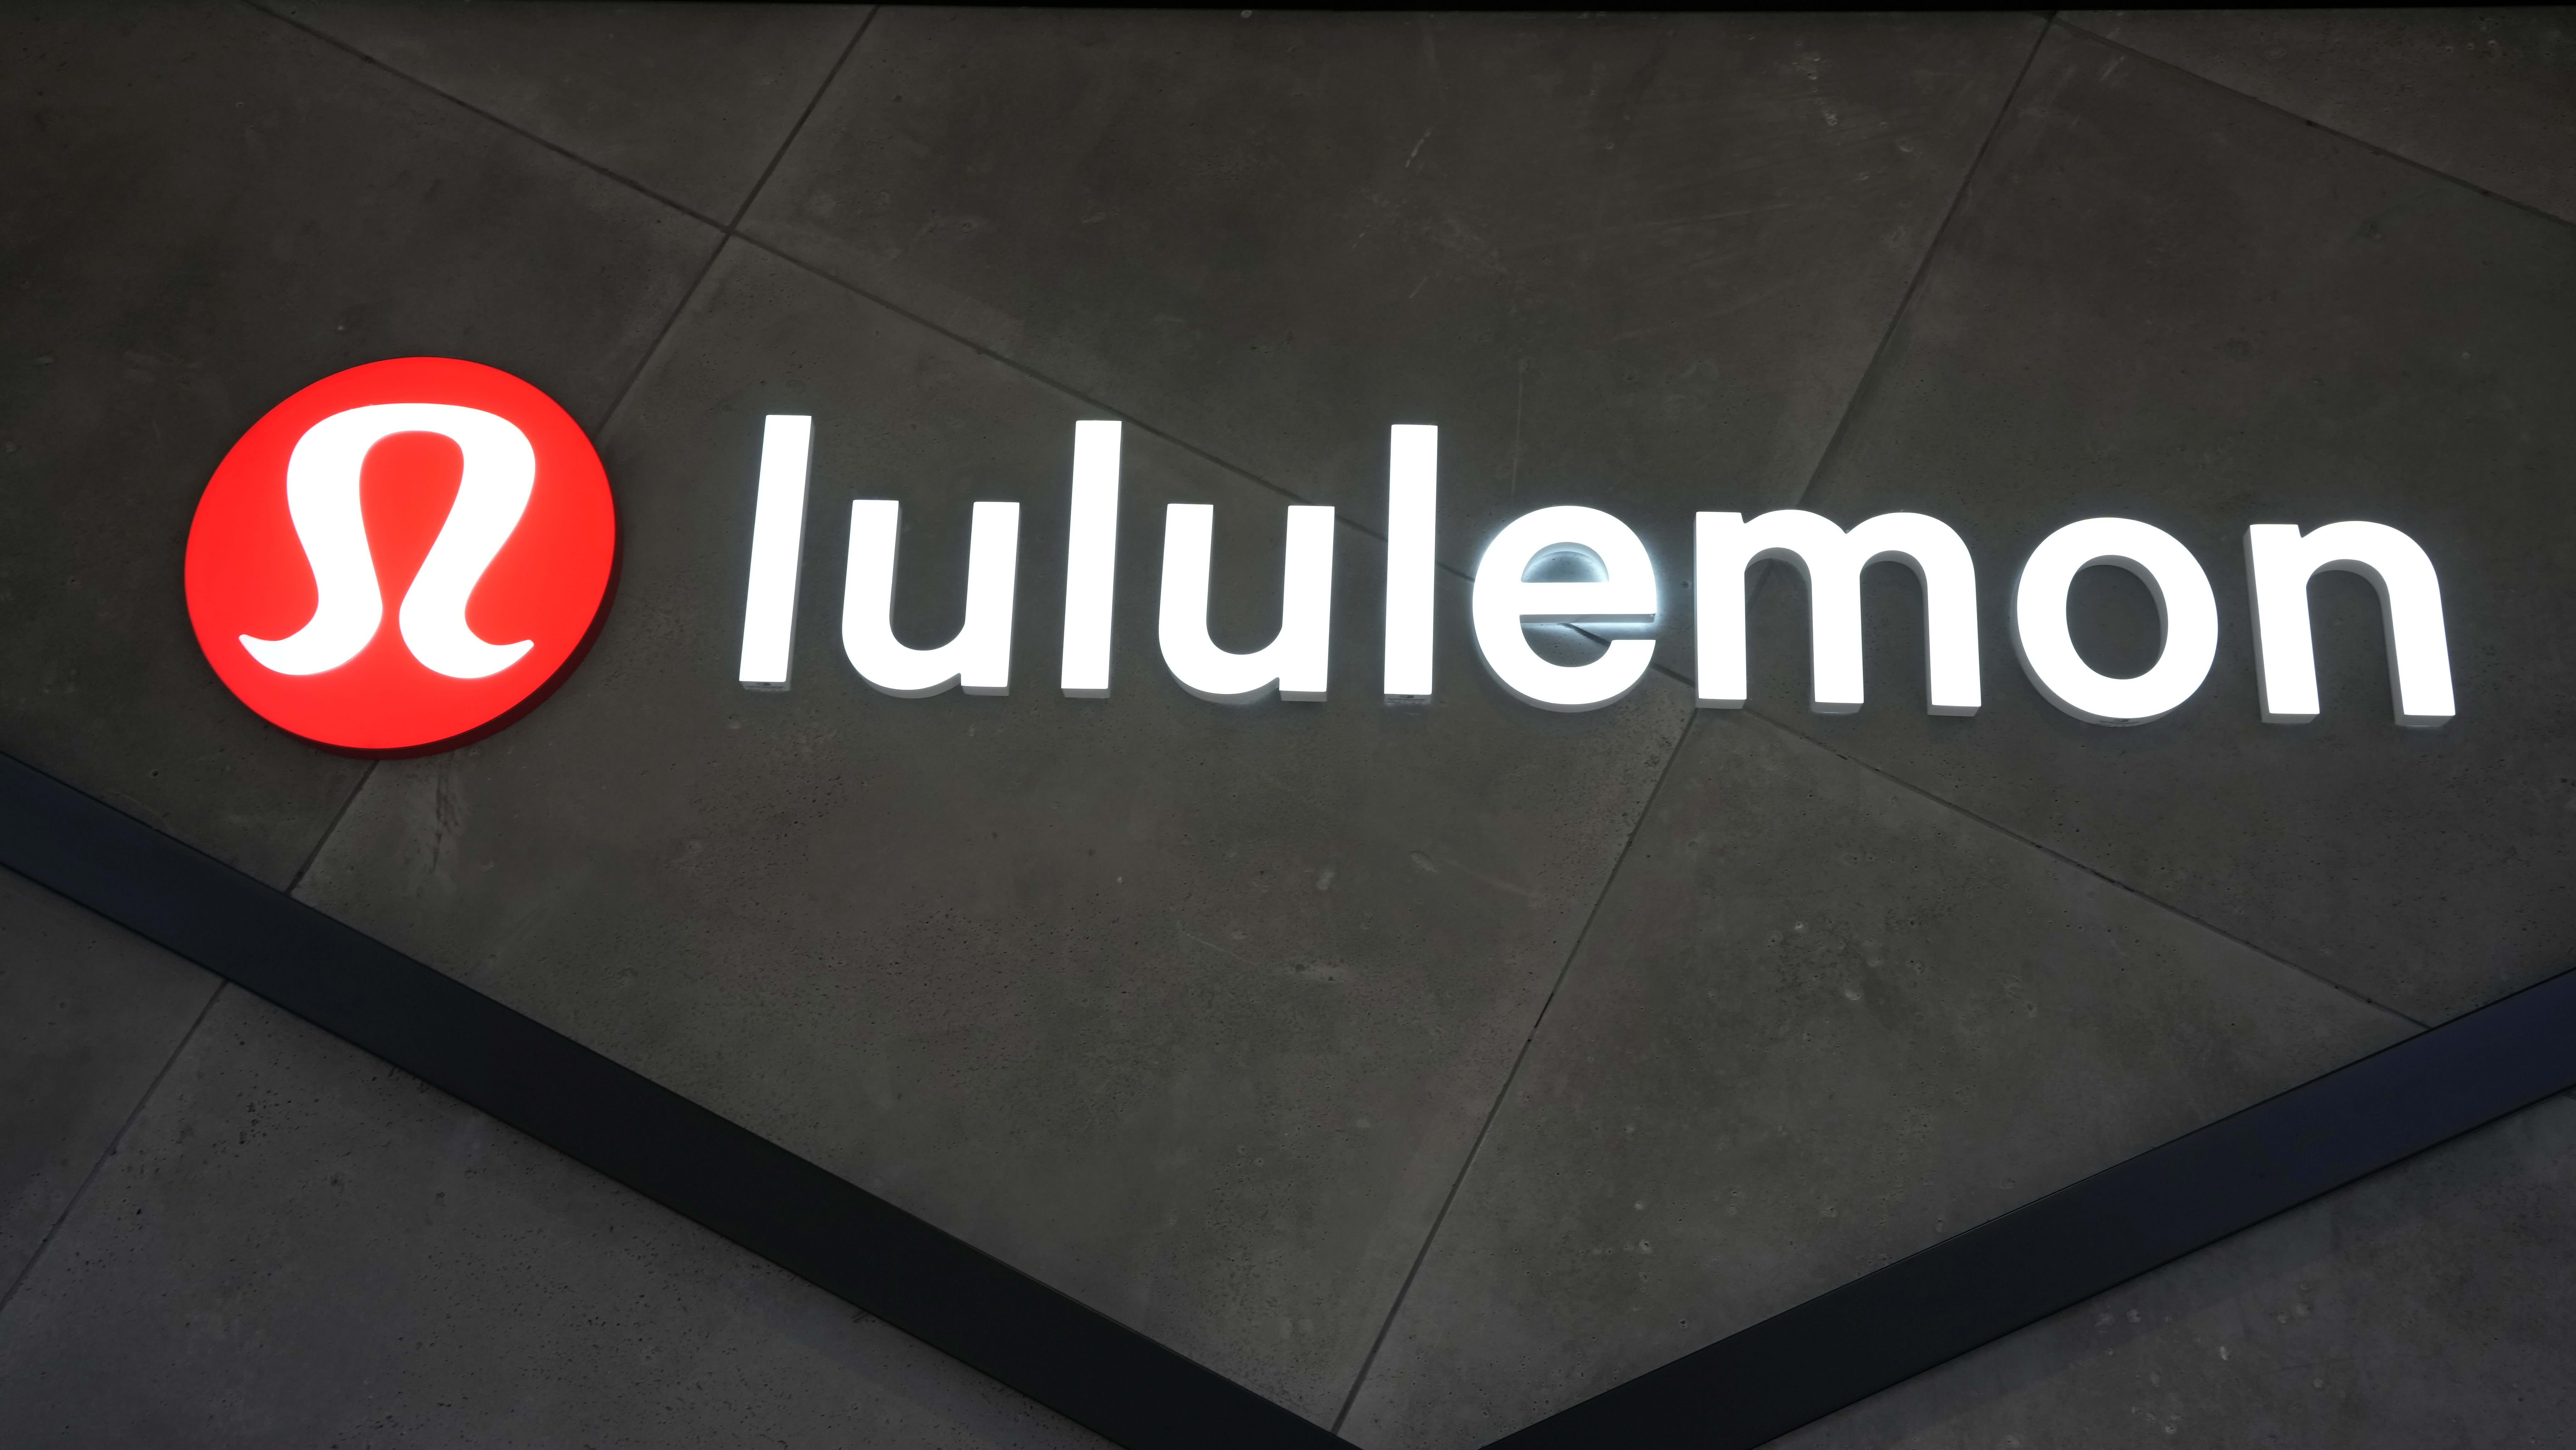 LULU Stock Replaces Microsoft's New Acquisition In S&P 500; How